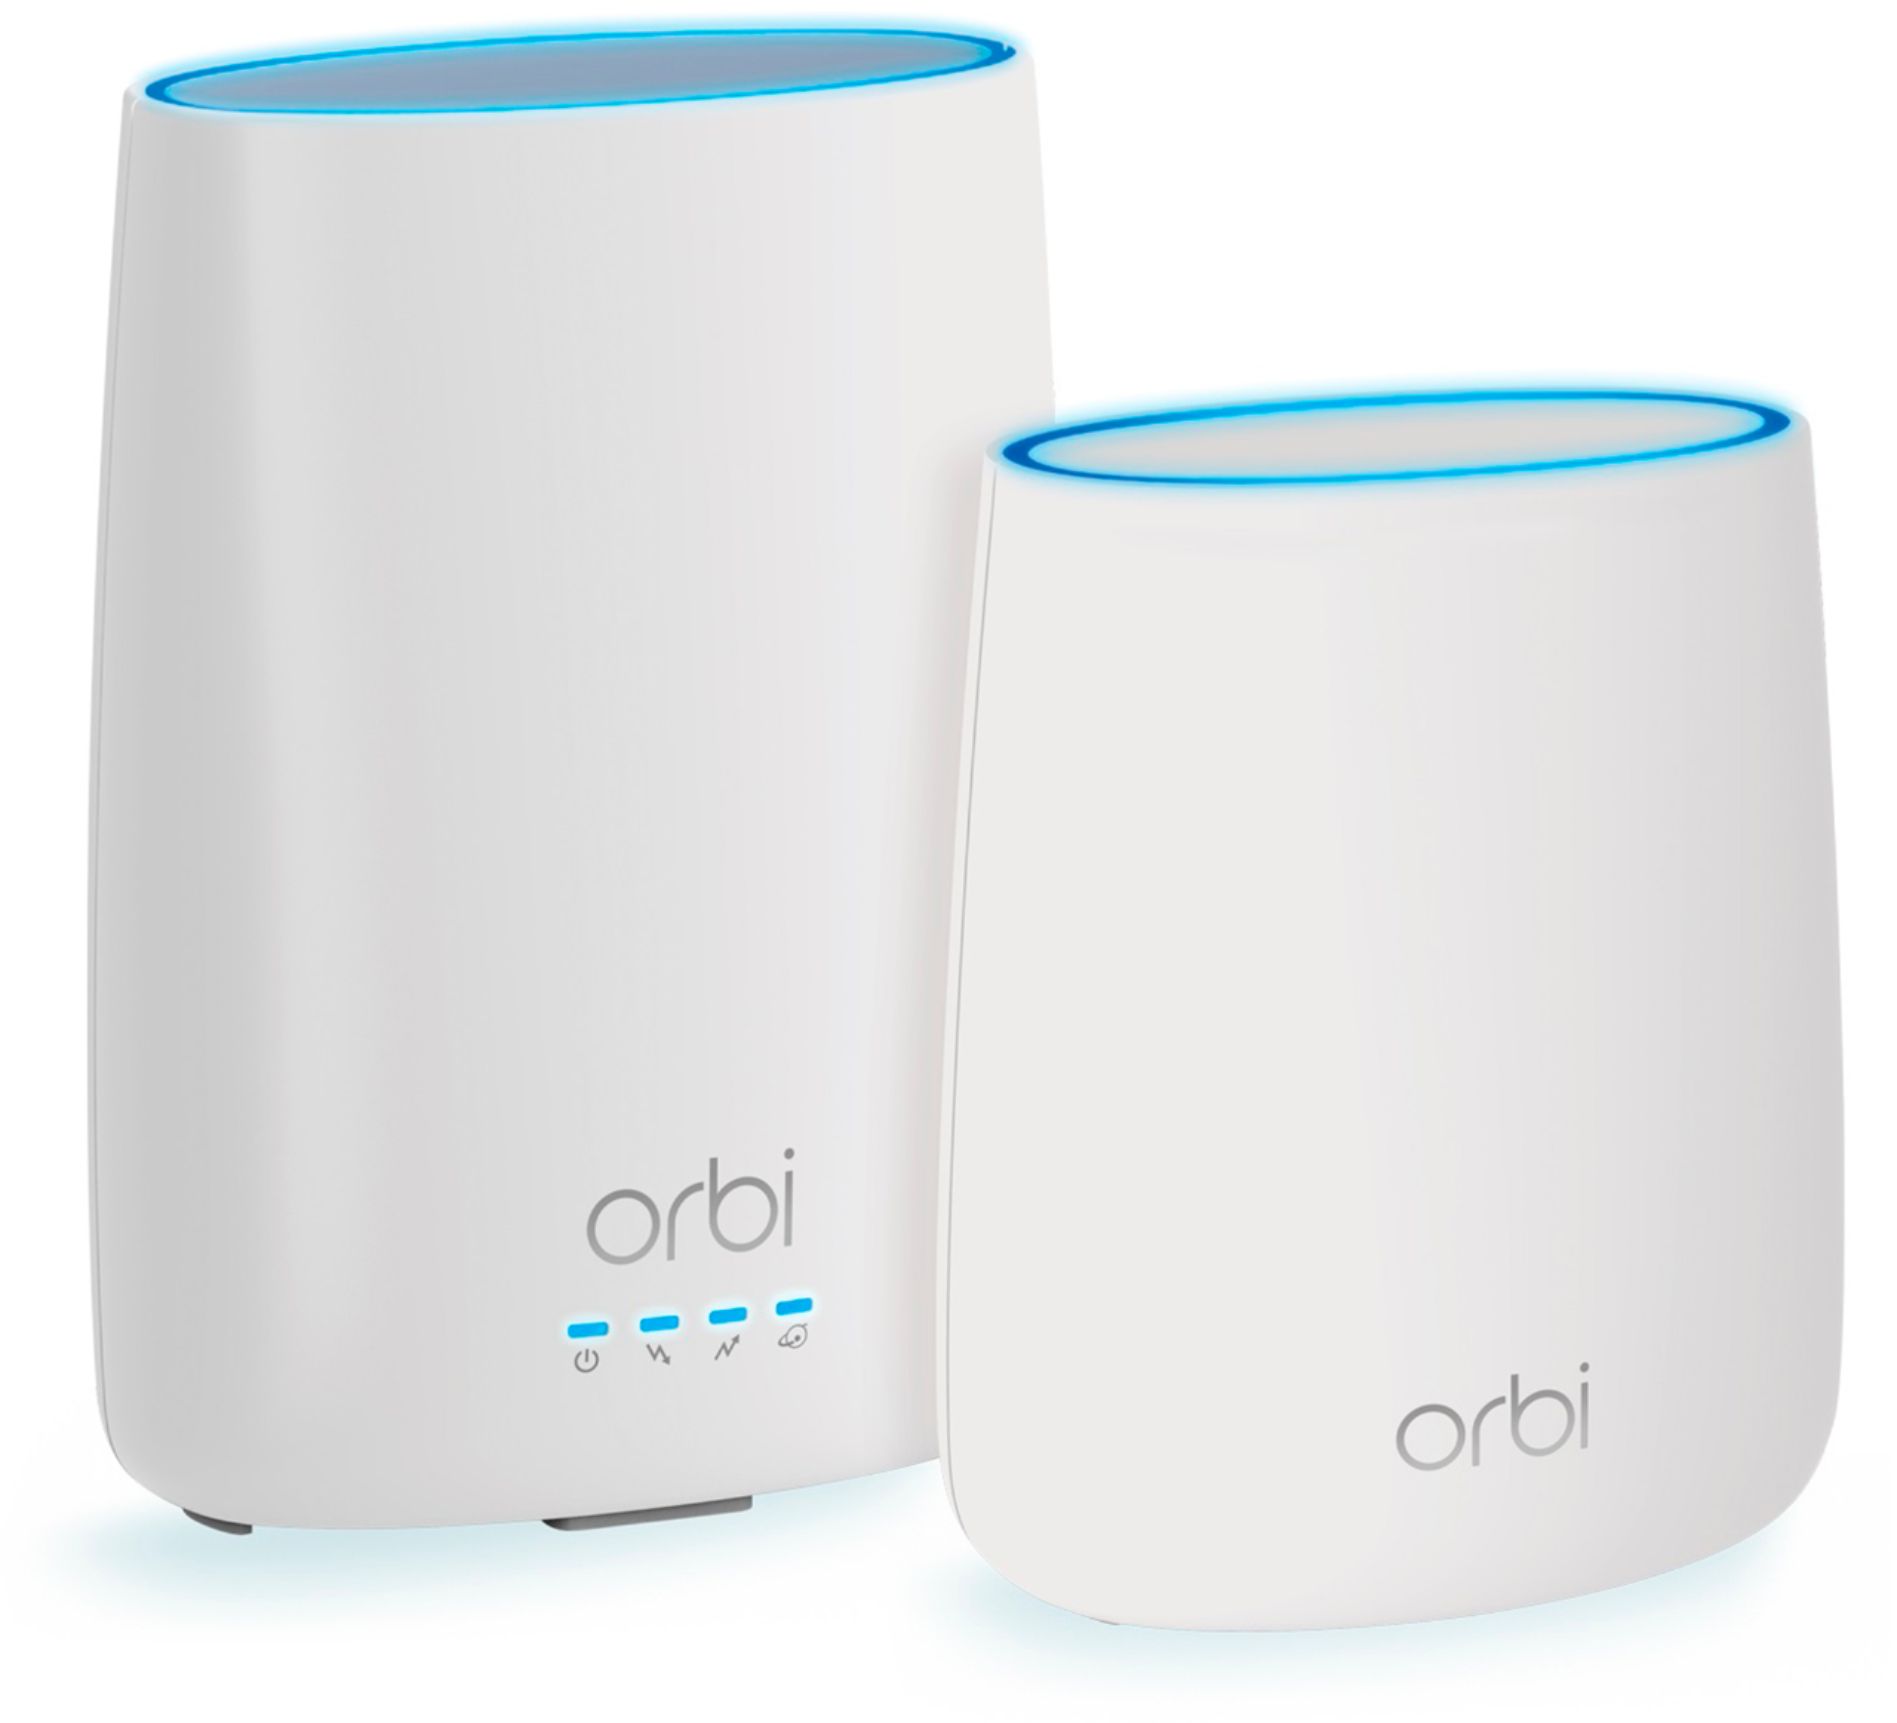 NETGEAR - Orbi Tri-Band AC2200 Mesh WiFi System with 32 x 8 DOCSIS 3.0 Cable Modem built-in (2-Pack) - White